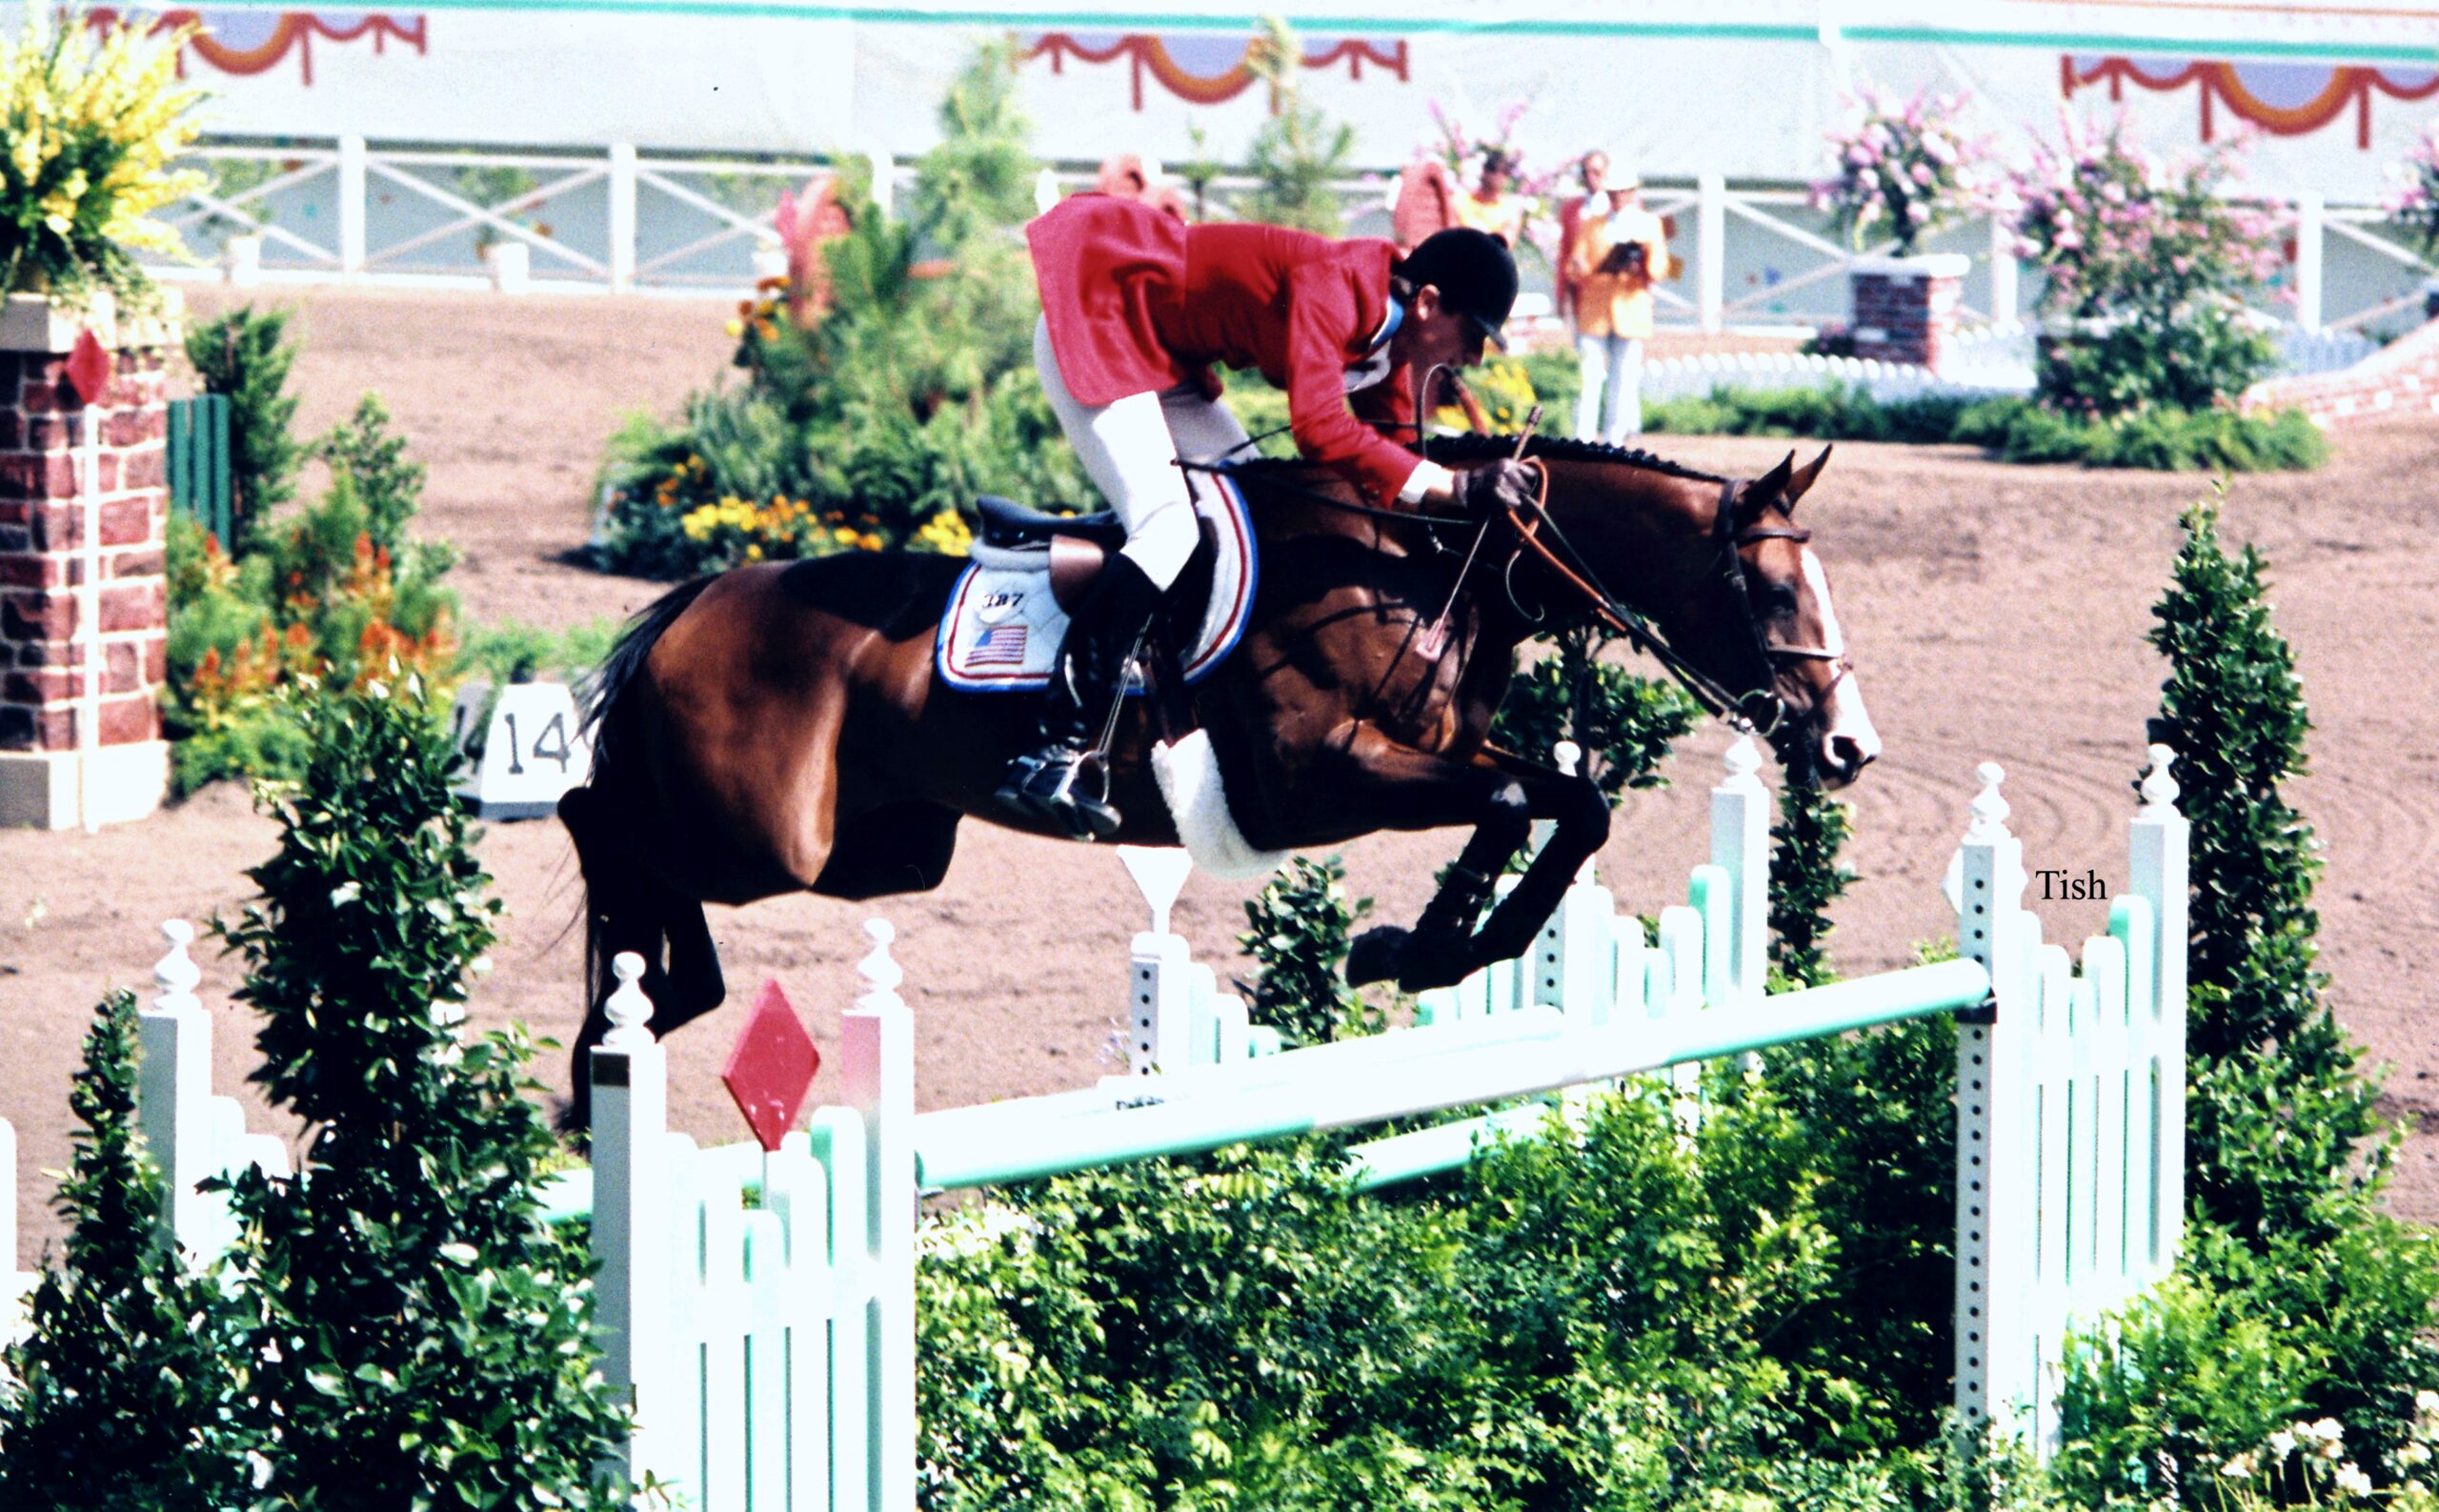 Touch Of Class with Joe Fargis riding at the 1984 Olympics. Photo by Tish Quirk.